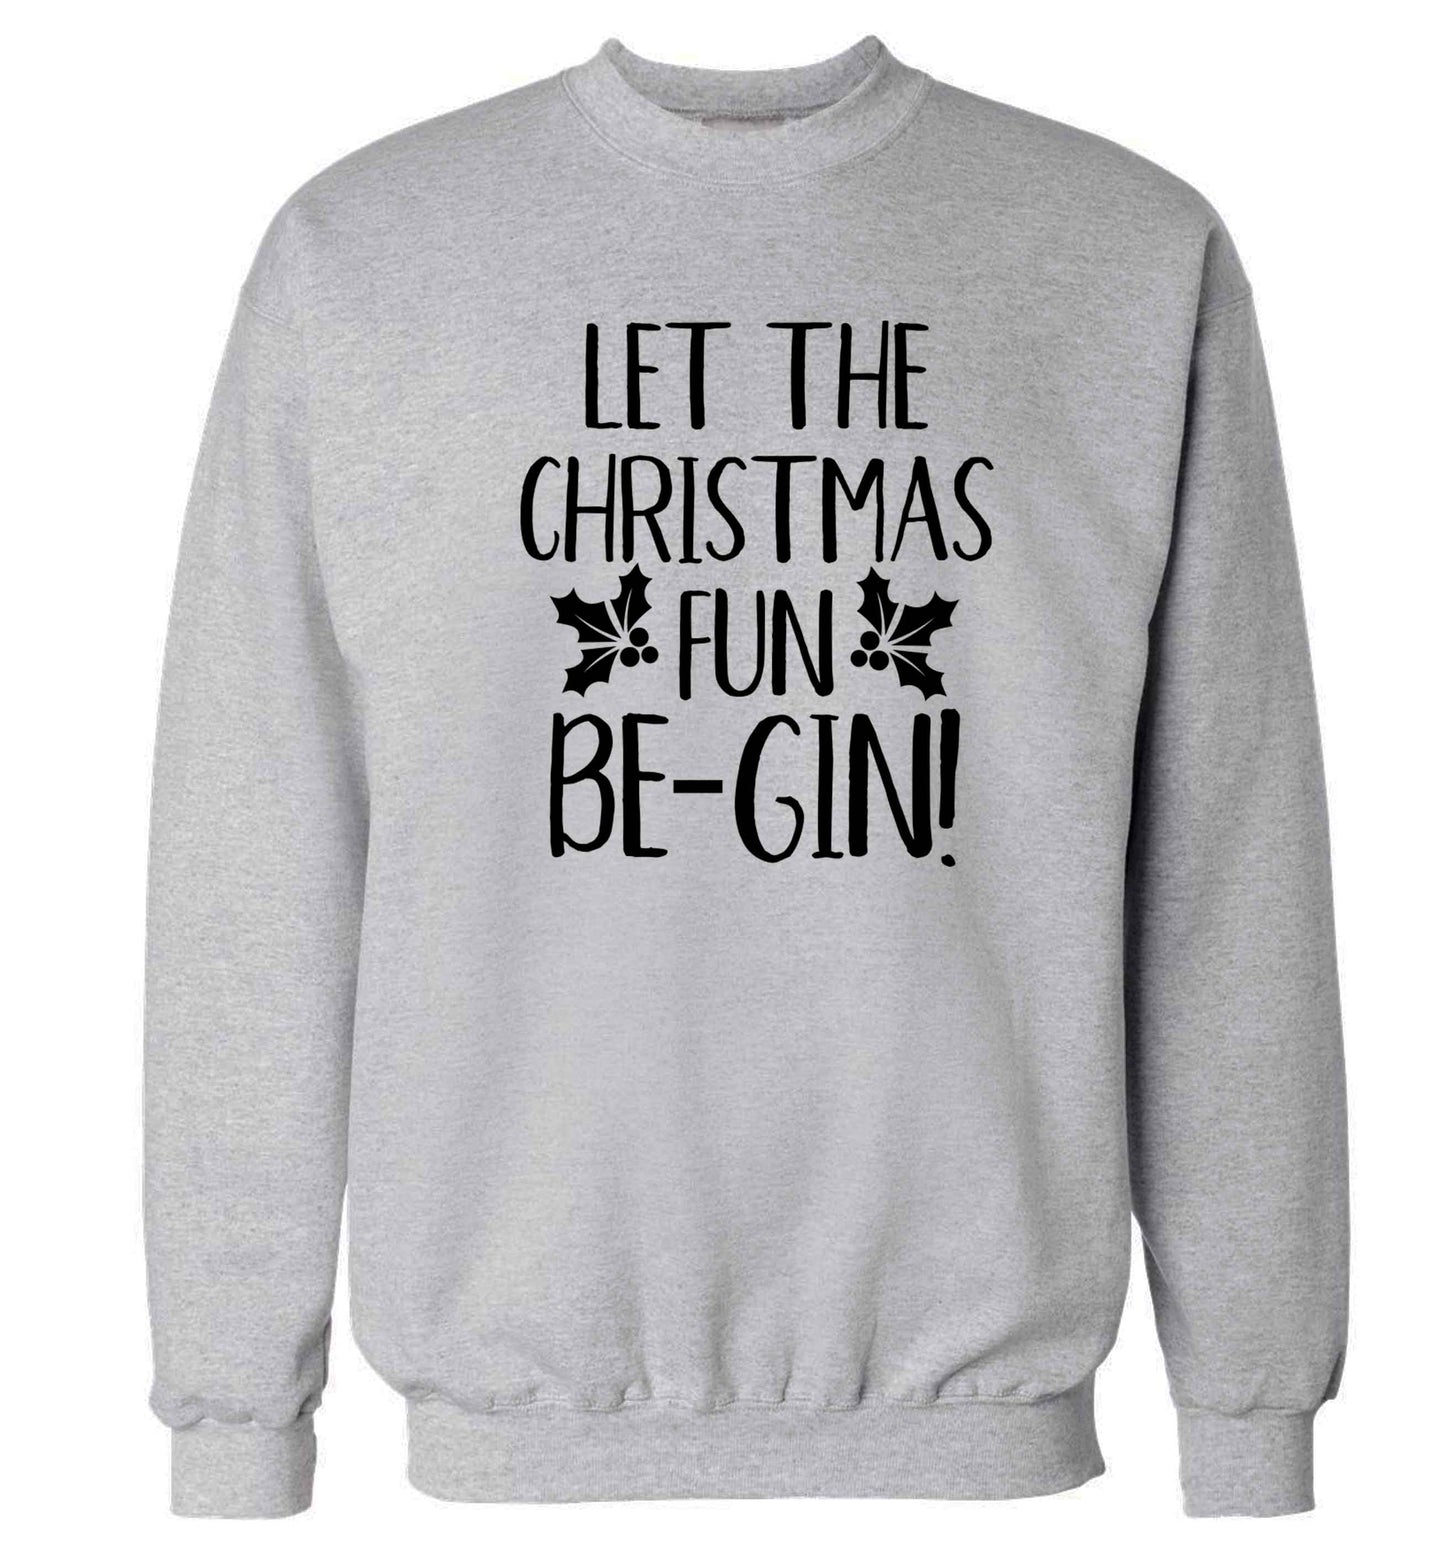 Let the christmas fun be-gin Adult's unisex grey Sweater 2XL